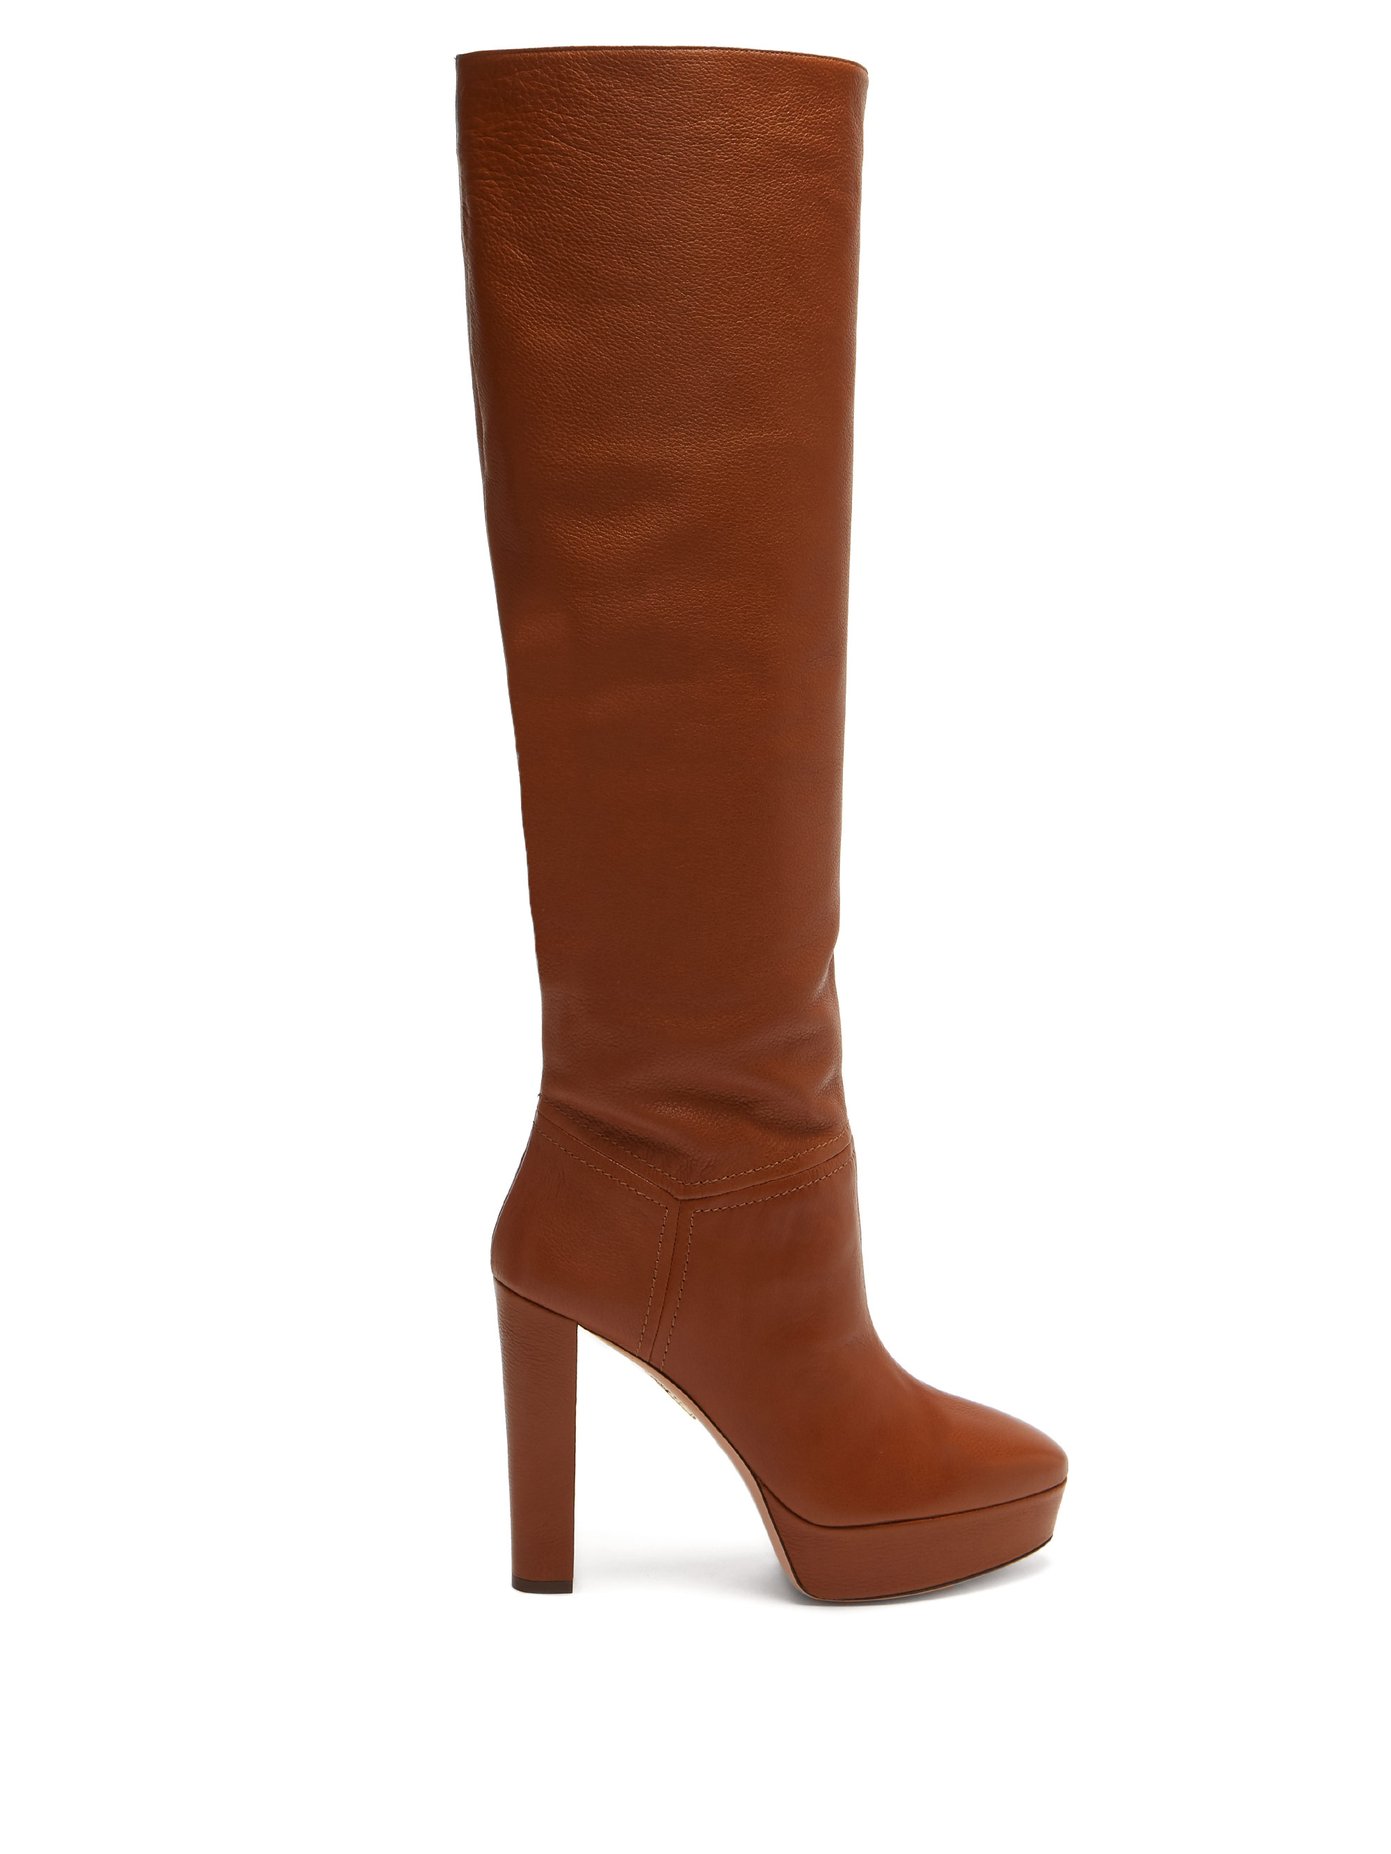 knee high boots tan leather